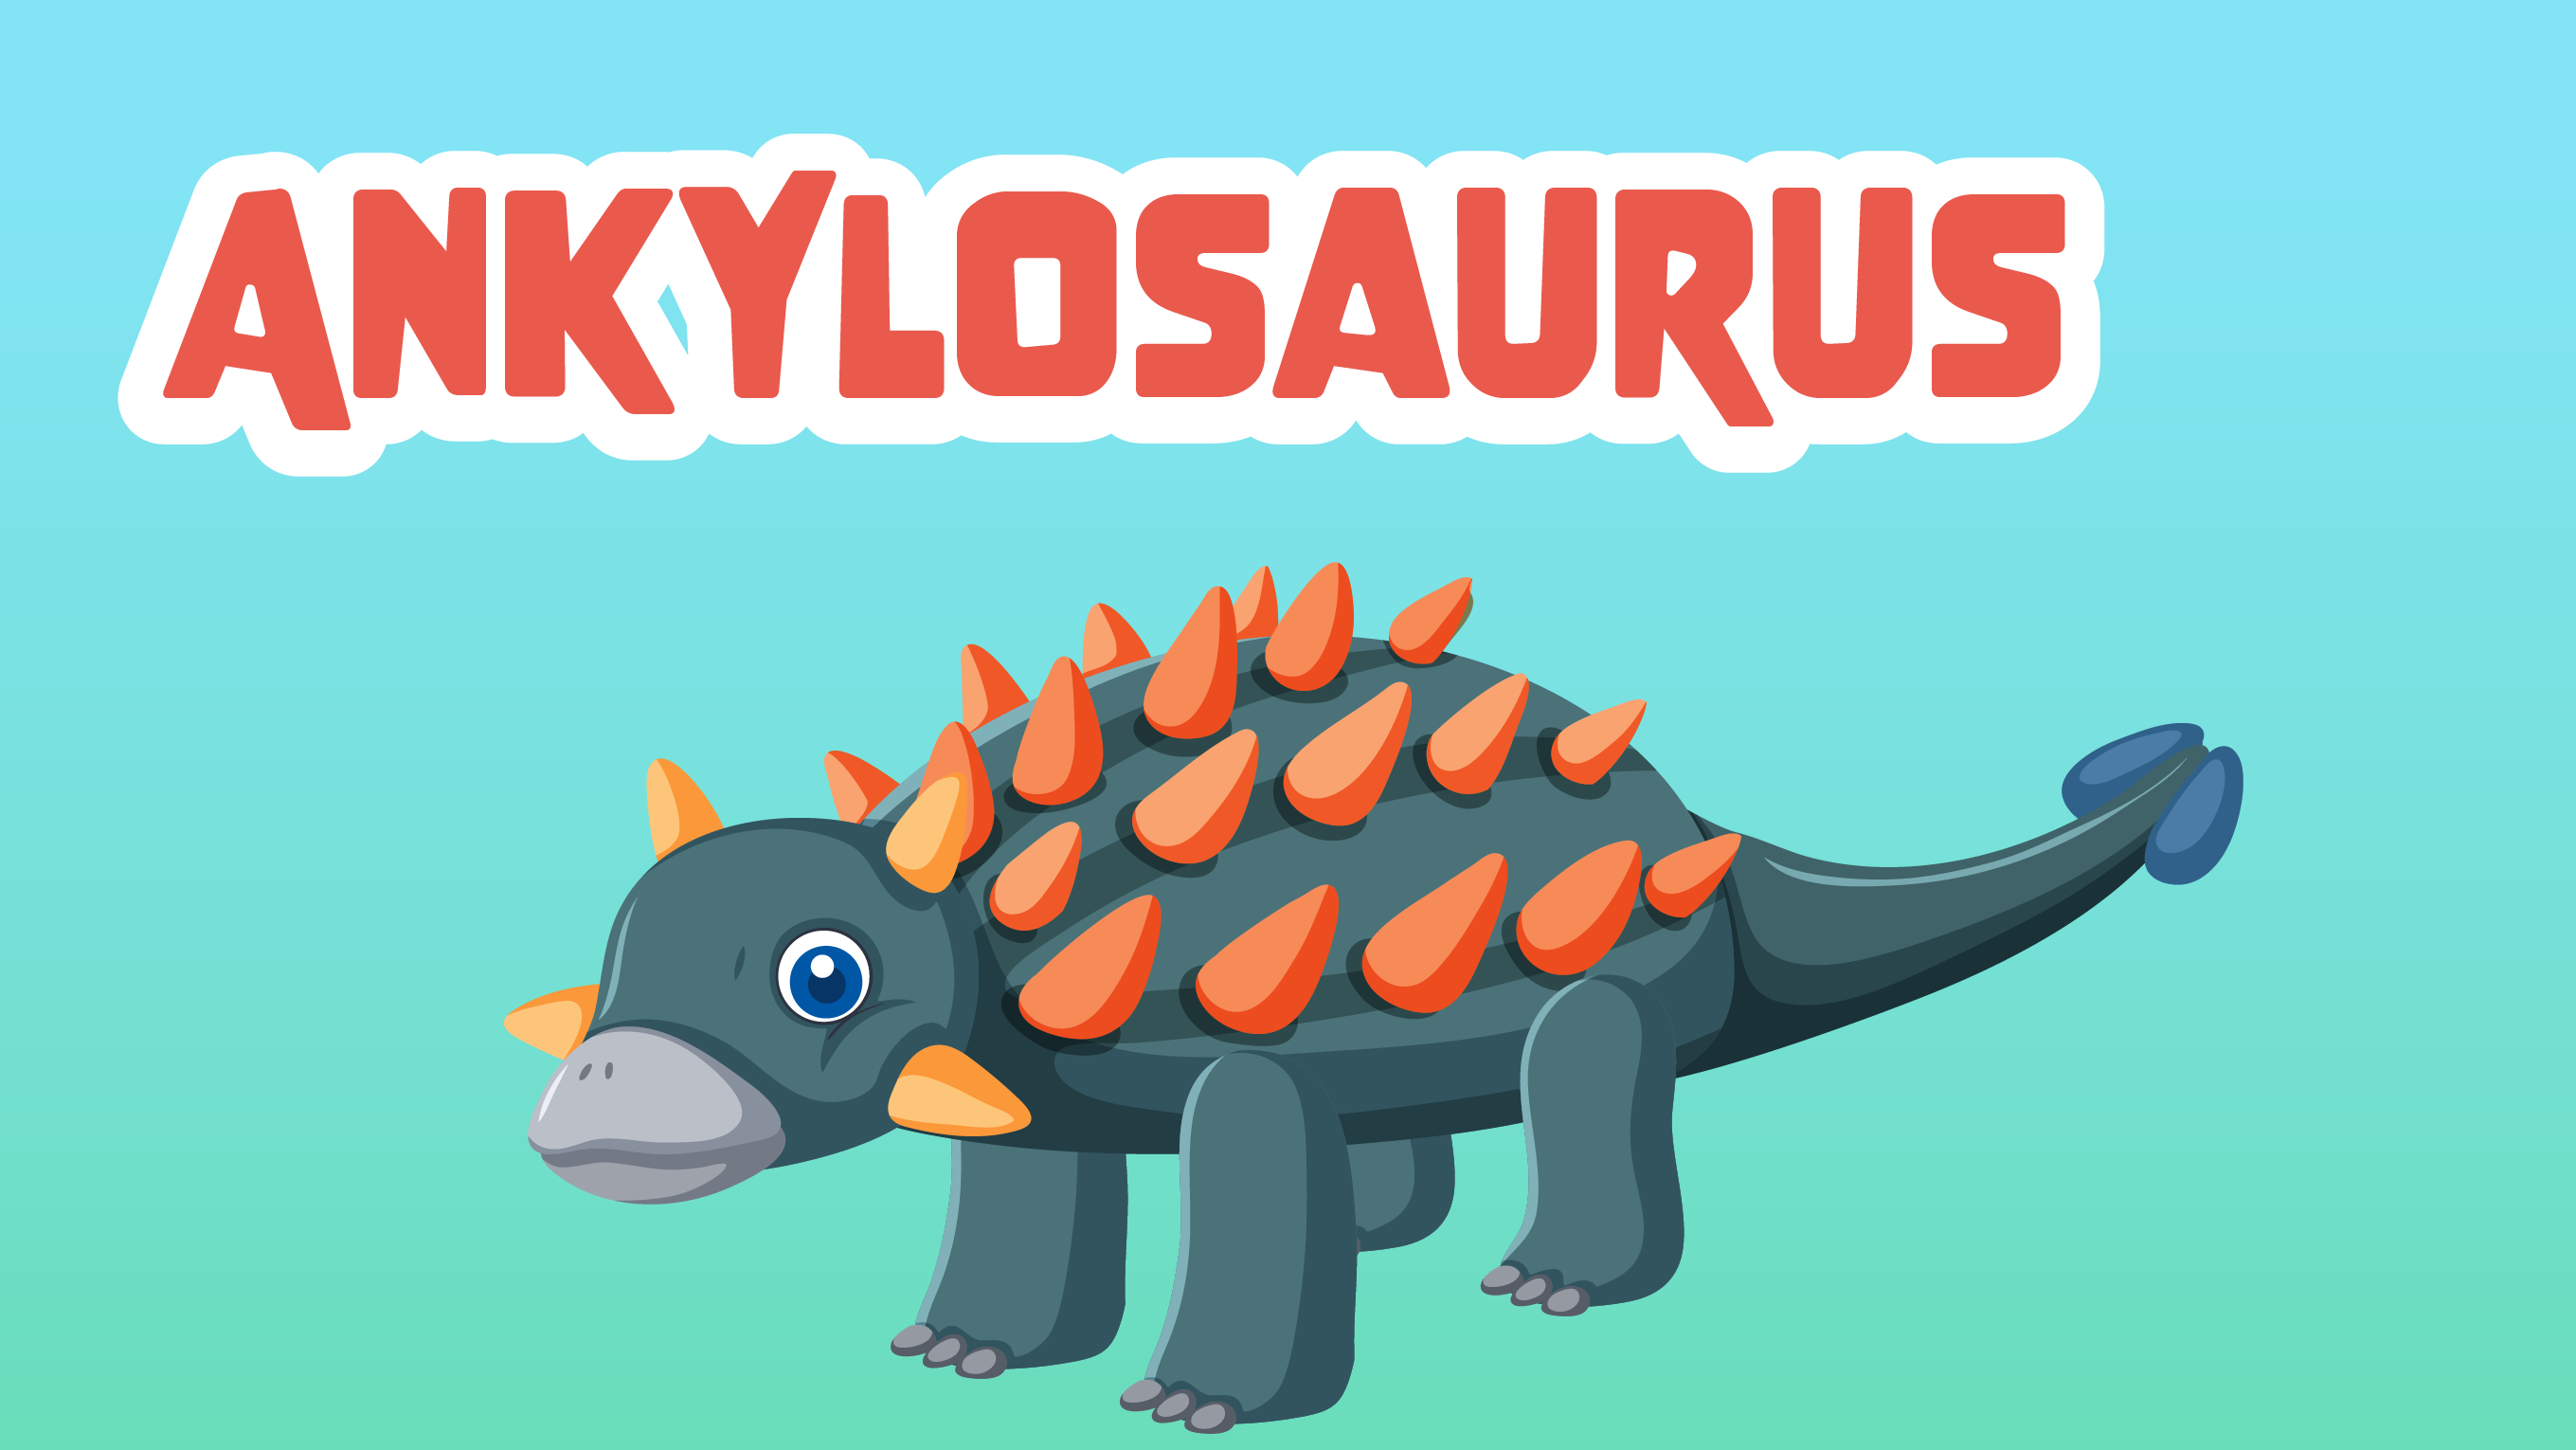 Ankylosaurus Facts for Kids – 5 Awesome Facts about the Ankylosaurus